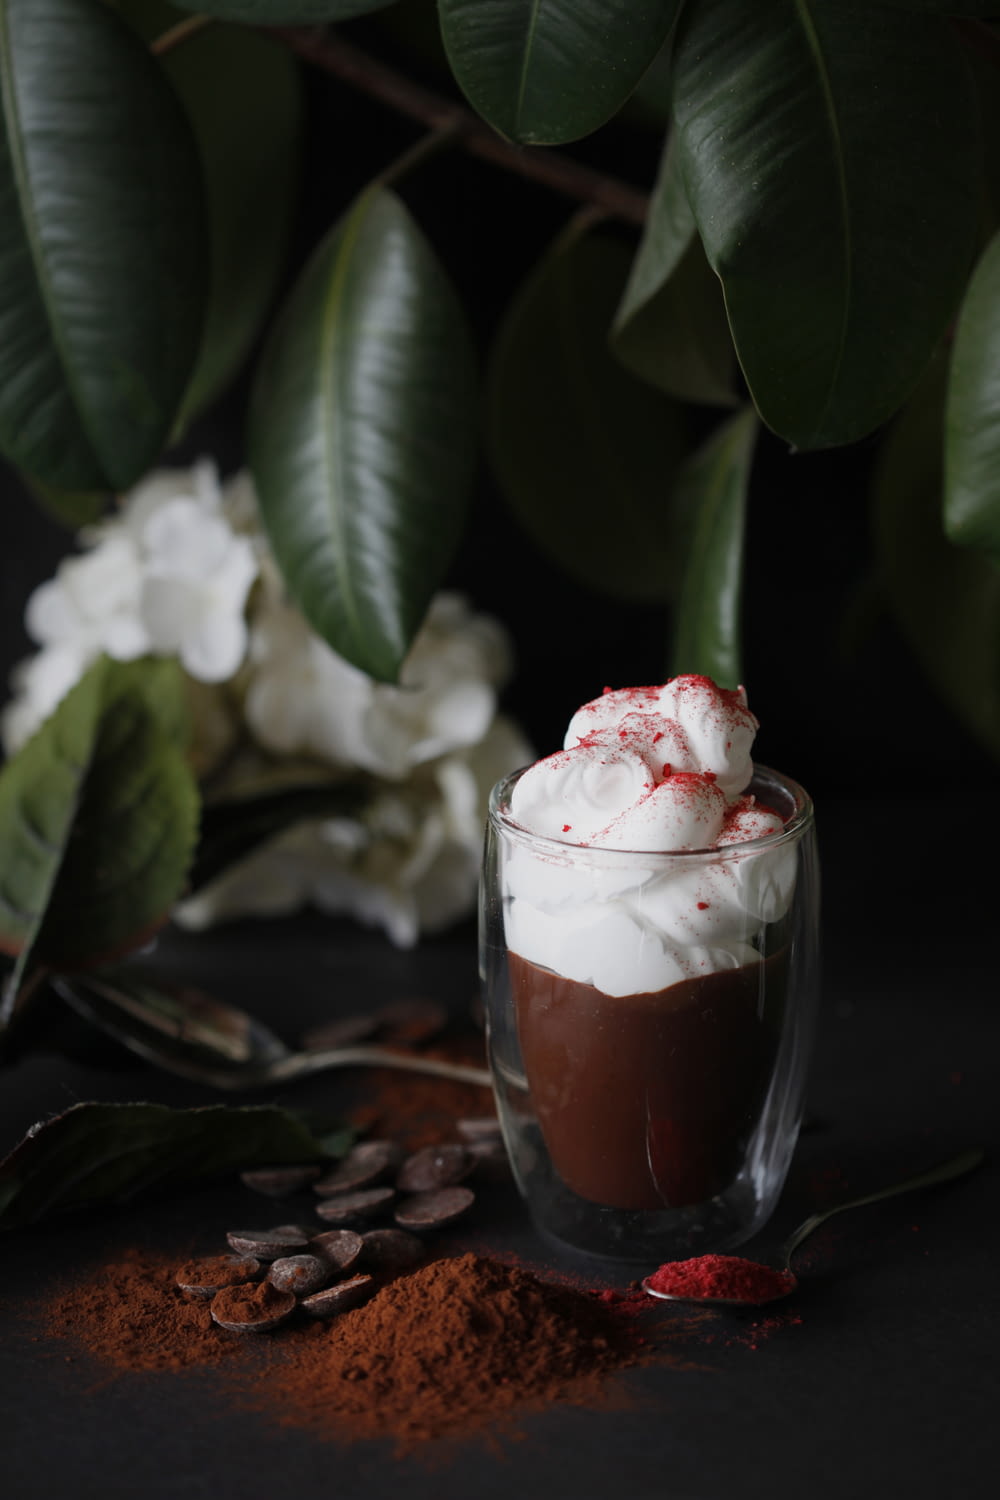 chocolate drink with whipped cream topping